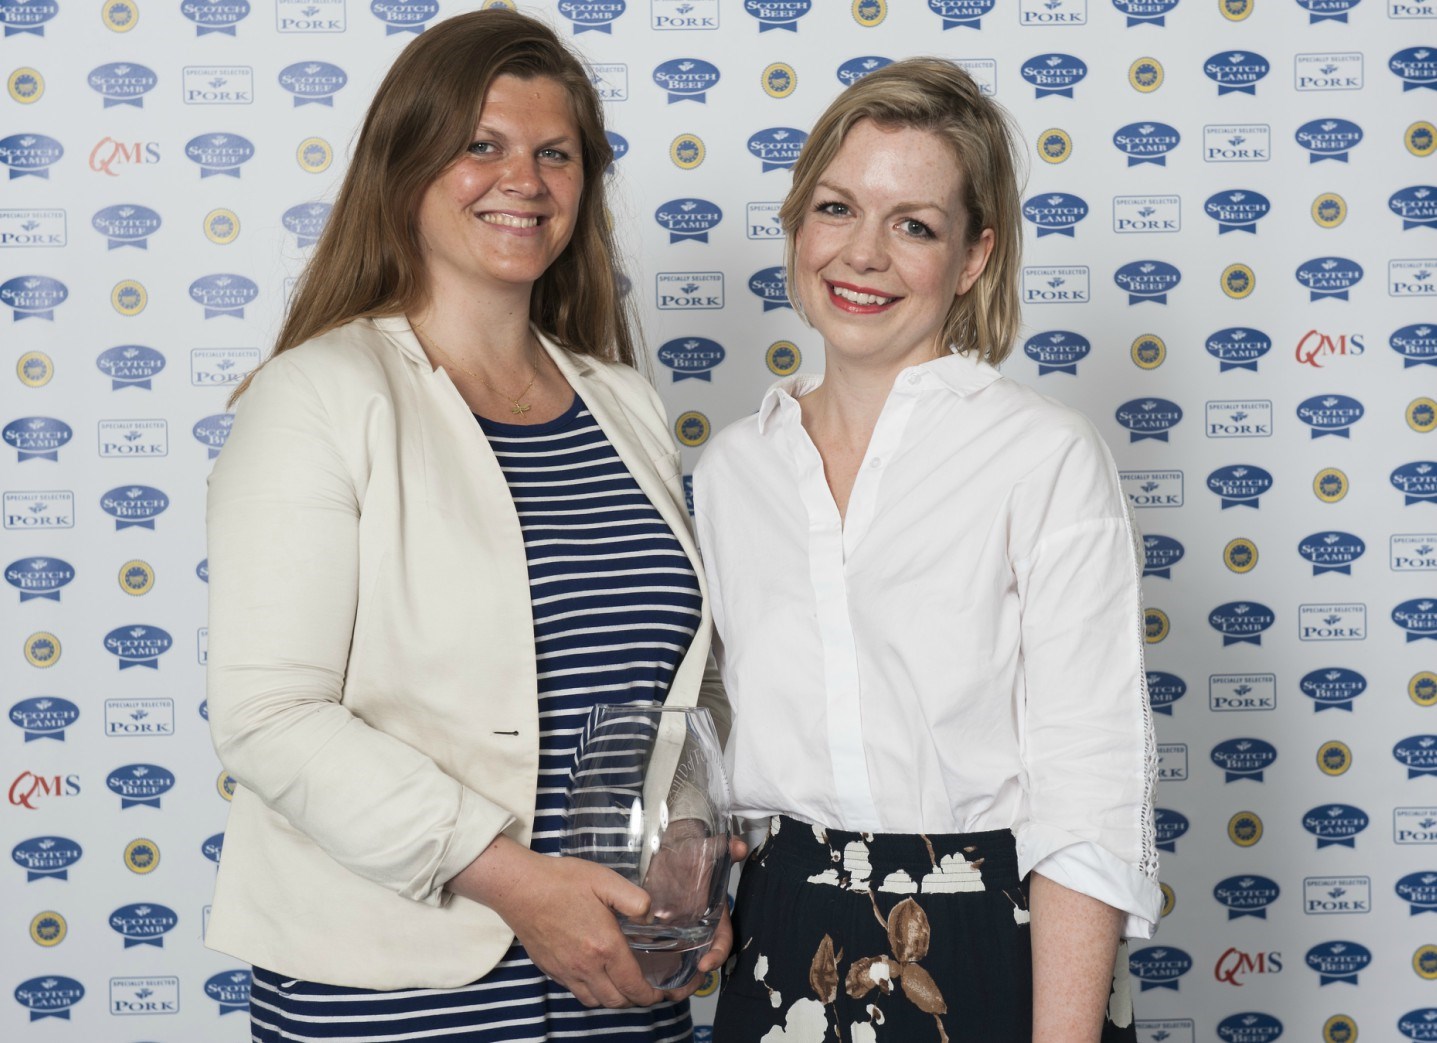 Sophie Lambert from Conville & Walsh (left) and Bea Hemming from Weidenfeld & Nicolson accepting the Campaigning and Investigative Food Work Award on behalf of Tim Spector